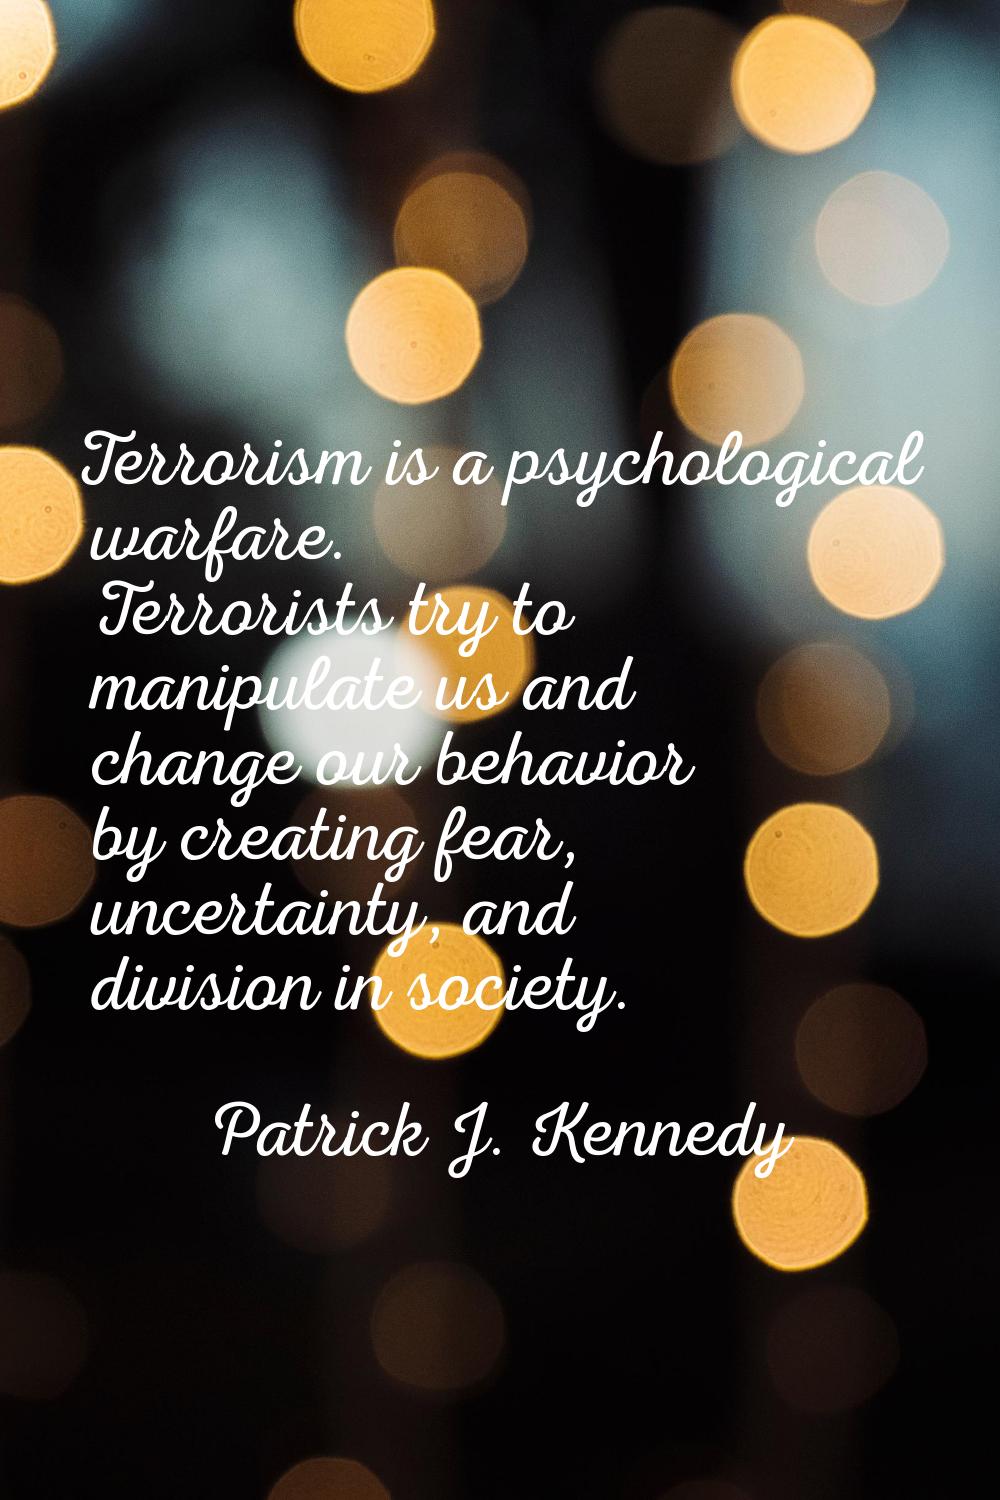 Terrorism is a psychological warfare. Terrorists try to manipulate us and change our behavior by cr